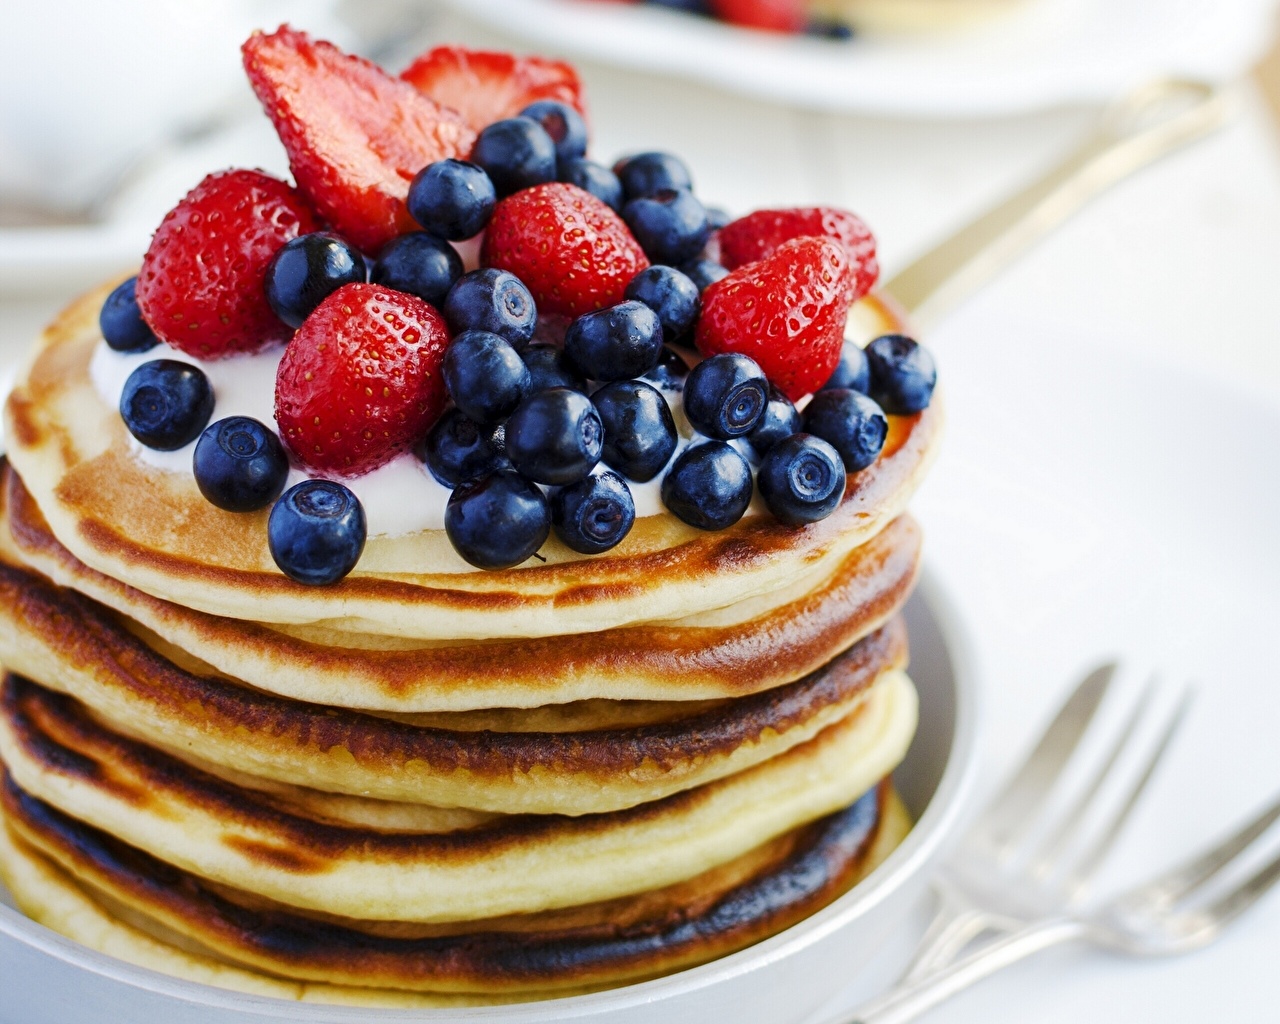 Images Pancake Strawberry Blueberries Food Closeup - Pancakes With Blueberries And Strawberries , HD Wallpaper & Backgrounds